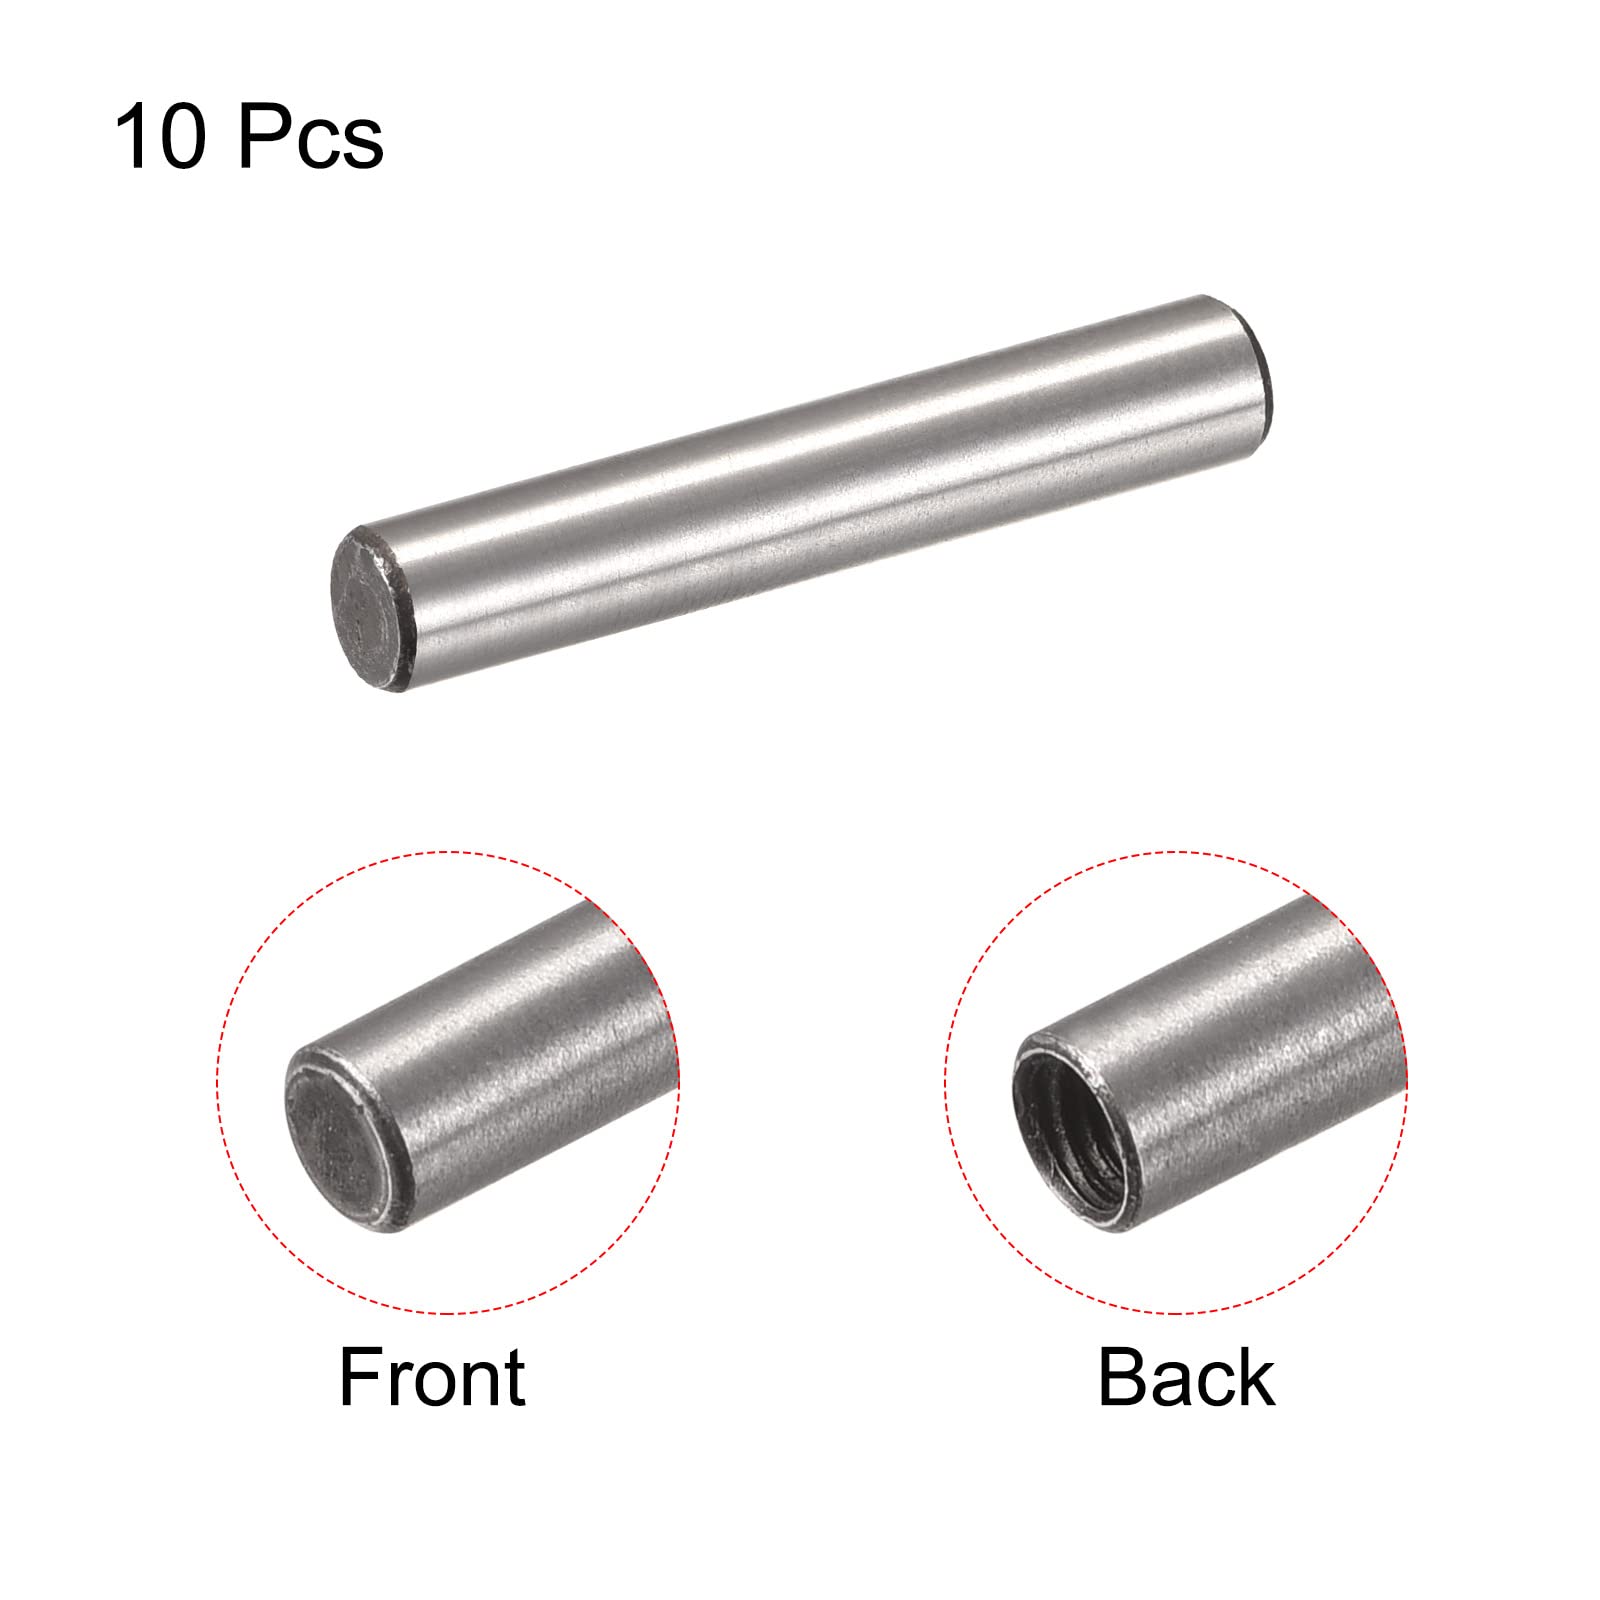 uxcell M3 Internal Thread Dowel Pin 10pcs 5x30mm Chamfering Flat Carbon Steel Cylindrical Pin Bed Bookshelf Metal Devices Industrial Pins